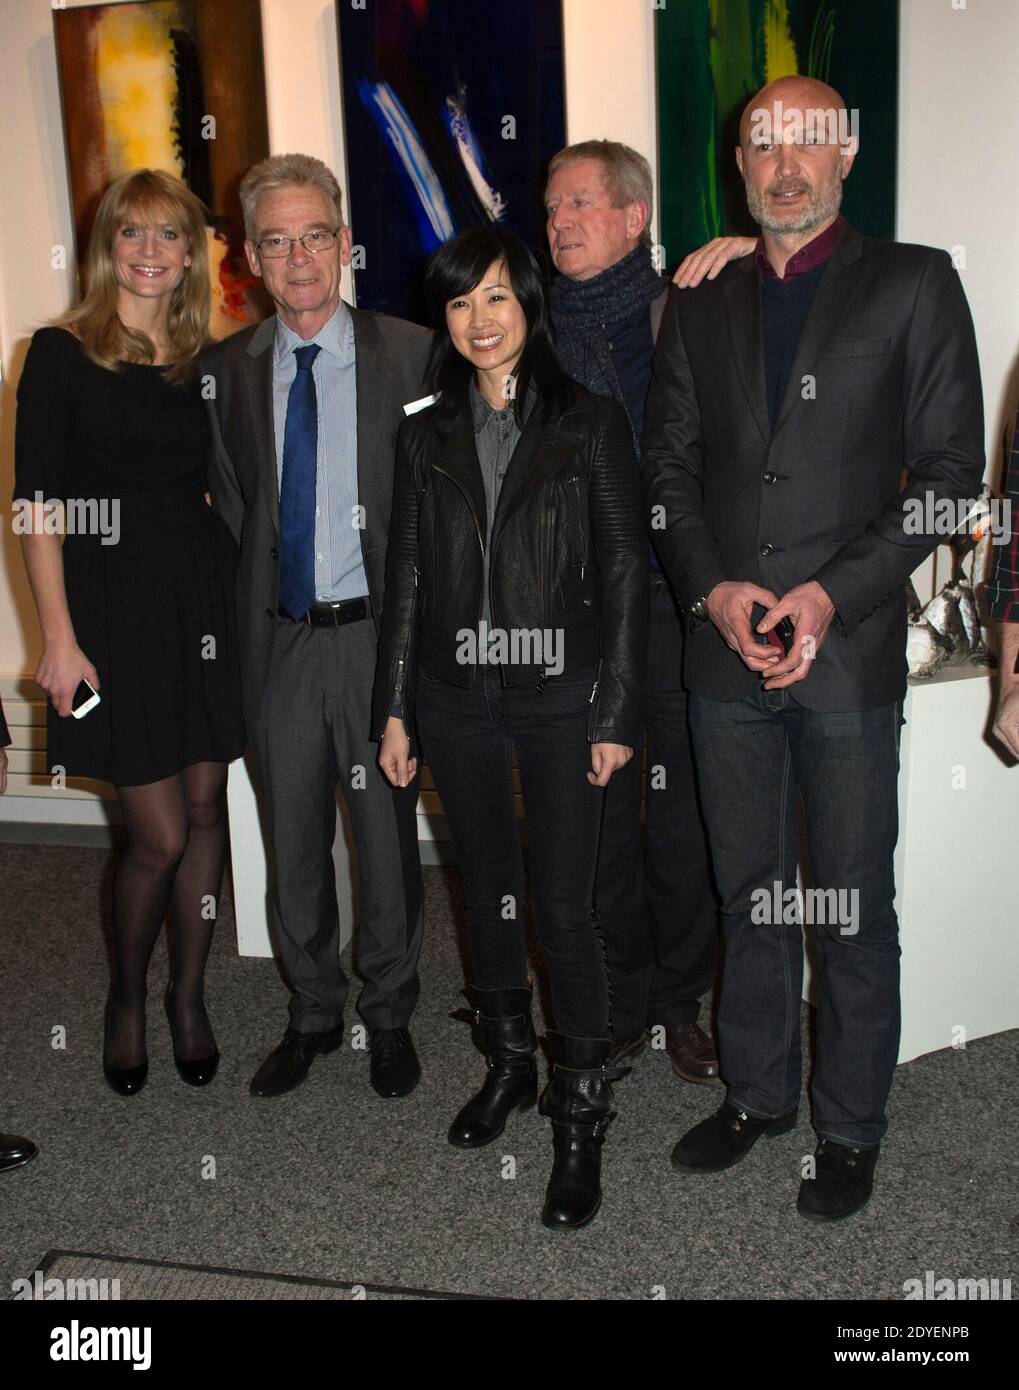 Sandrine Corman, Mayor of Saint Gervais Jean-Marc Peillex, Linh-Dan Pham,  Régis Wargnier and Franck Leboeuf pose before the opening of the 29th  International Festival Mont-Blanc D'Humour on March 17, 2013 in  Saint-Gervais-les-Bains,